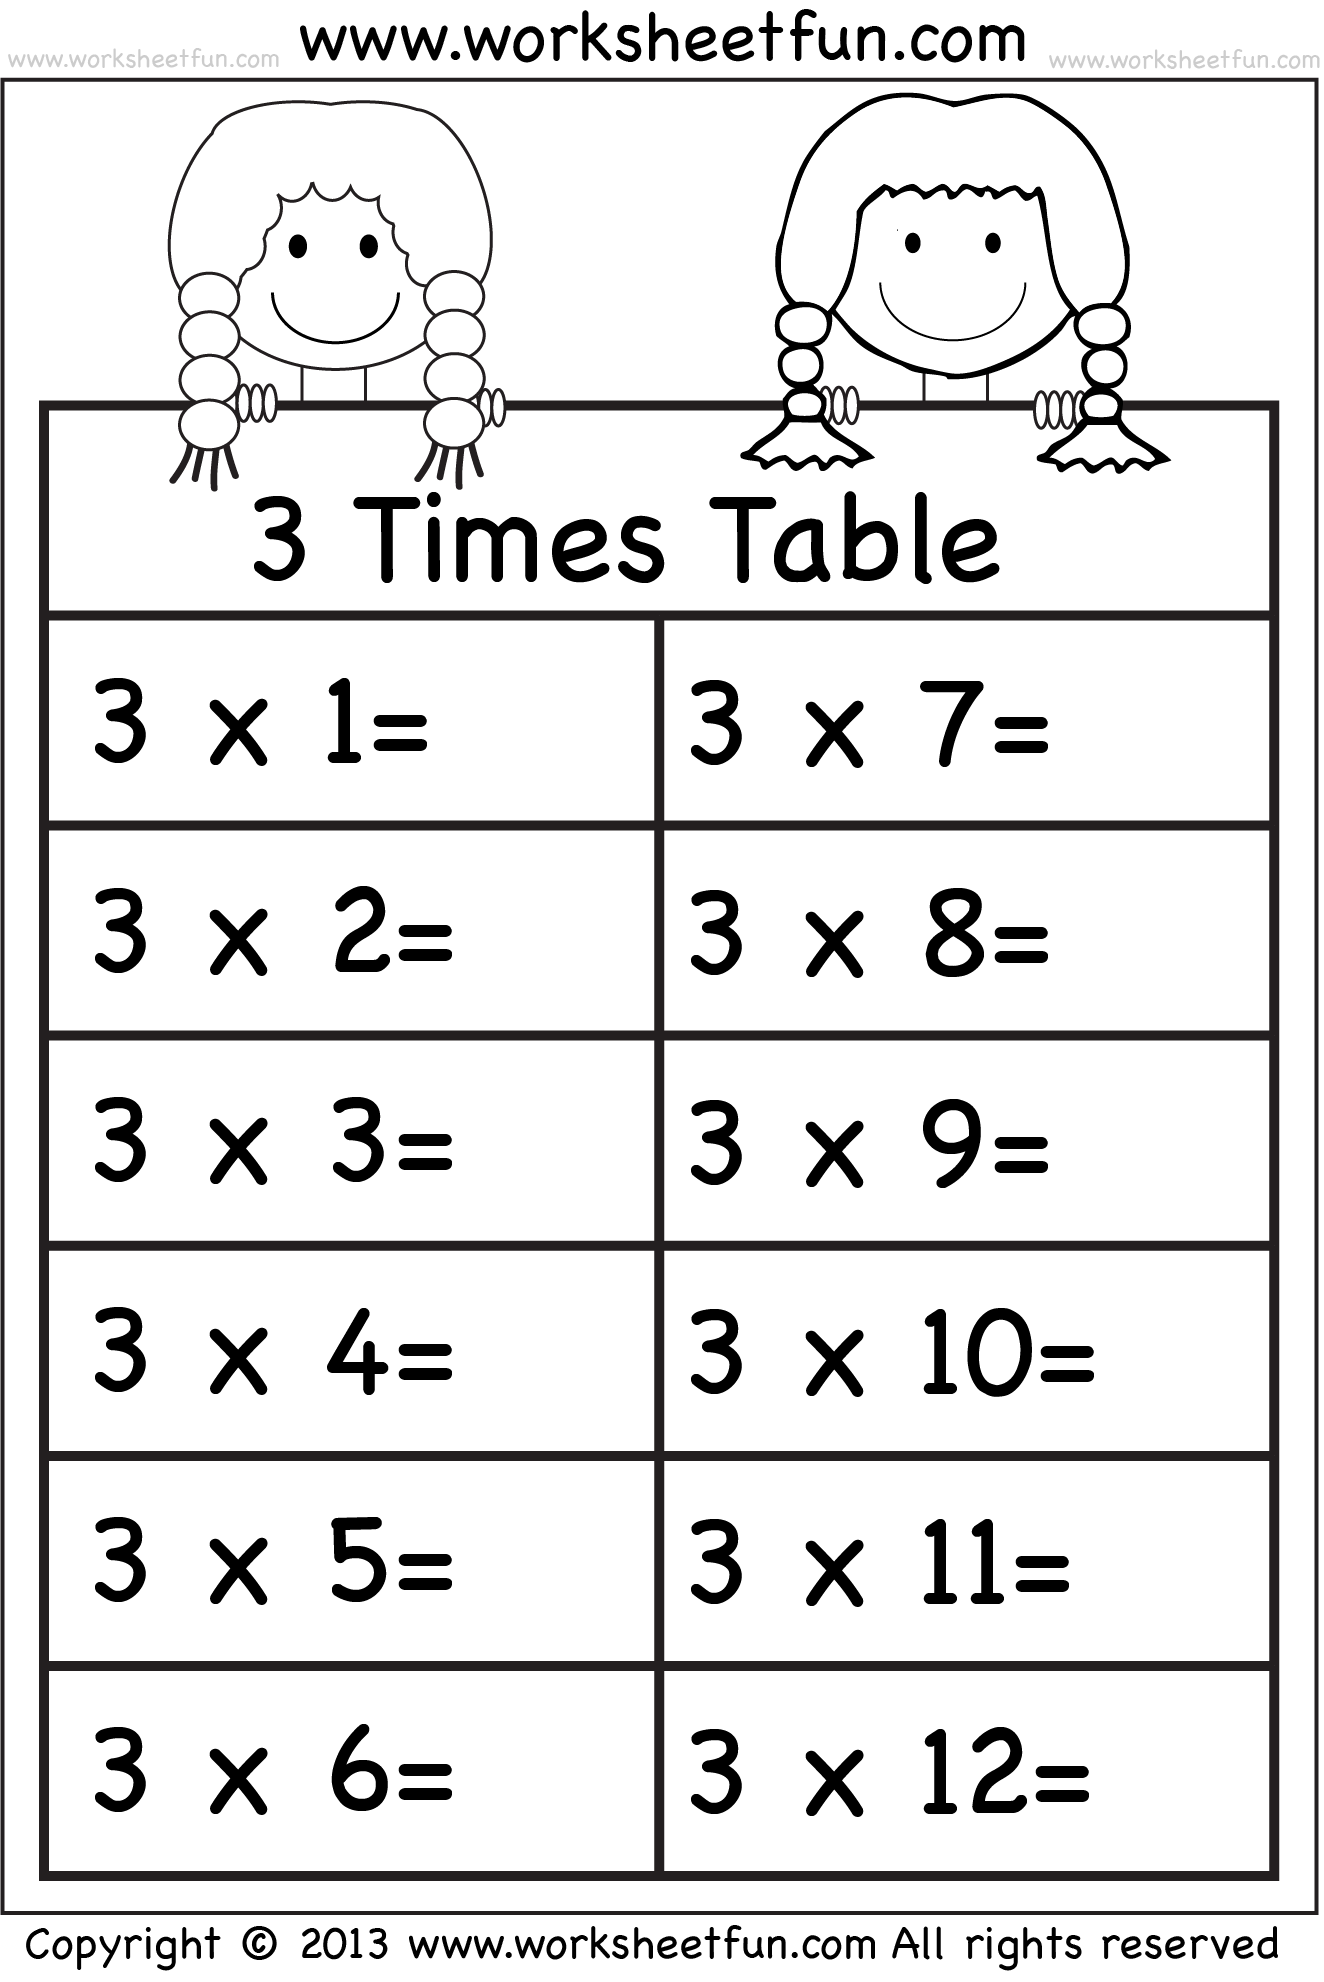 Times Tables Worksheets – 22, 22, 22, 22, 22, 22, 22, 22, 22, 22 and 222 Within 6 Times Table Worksheet